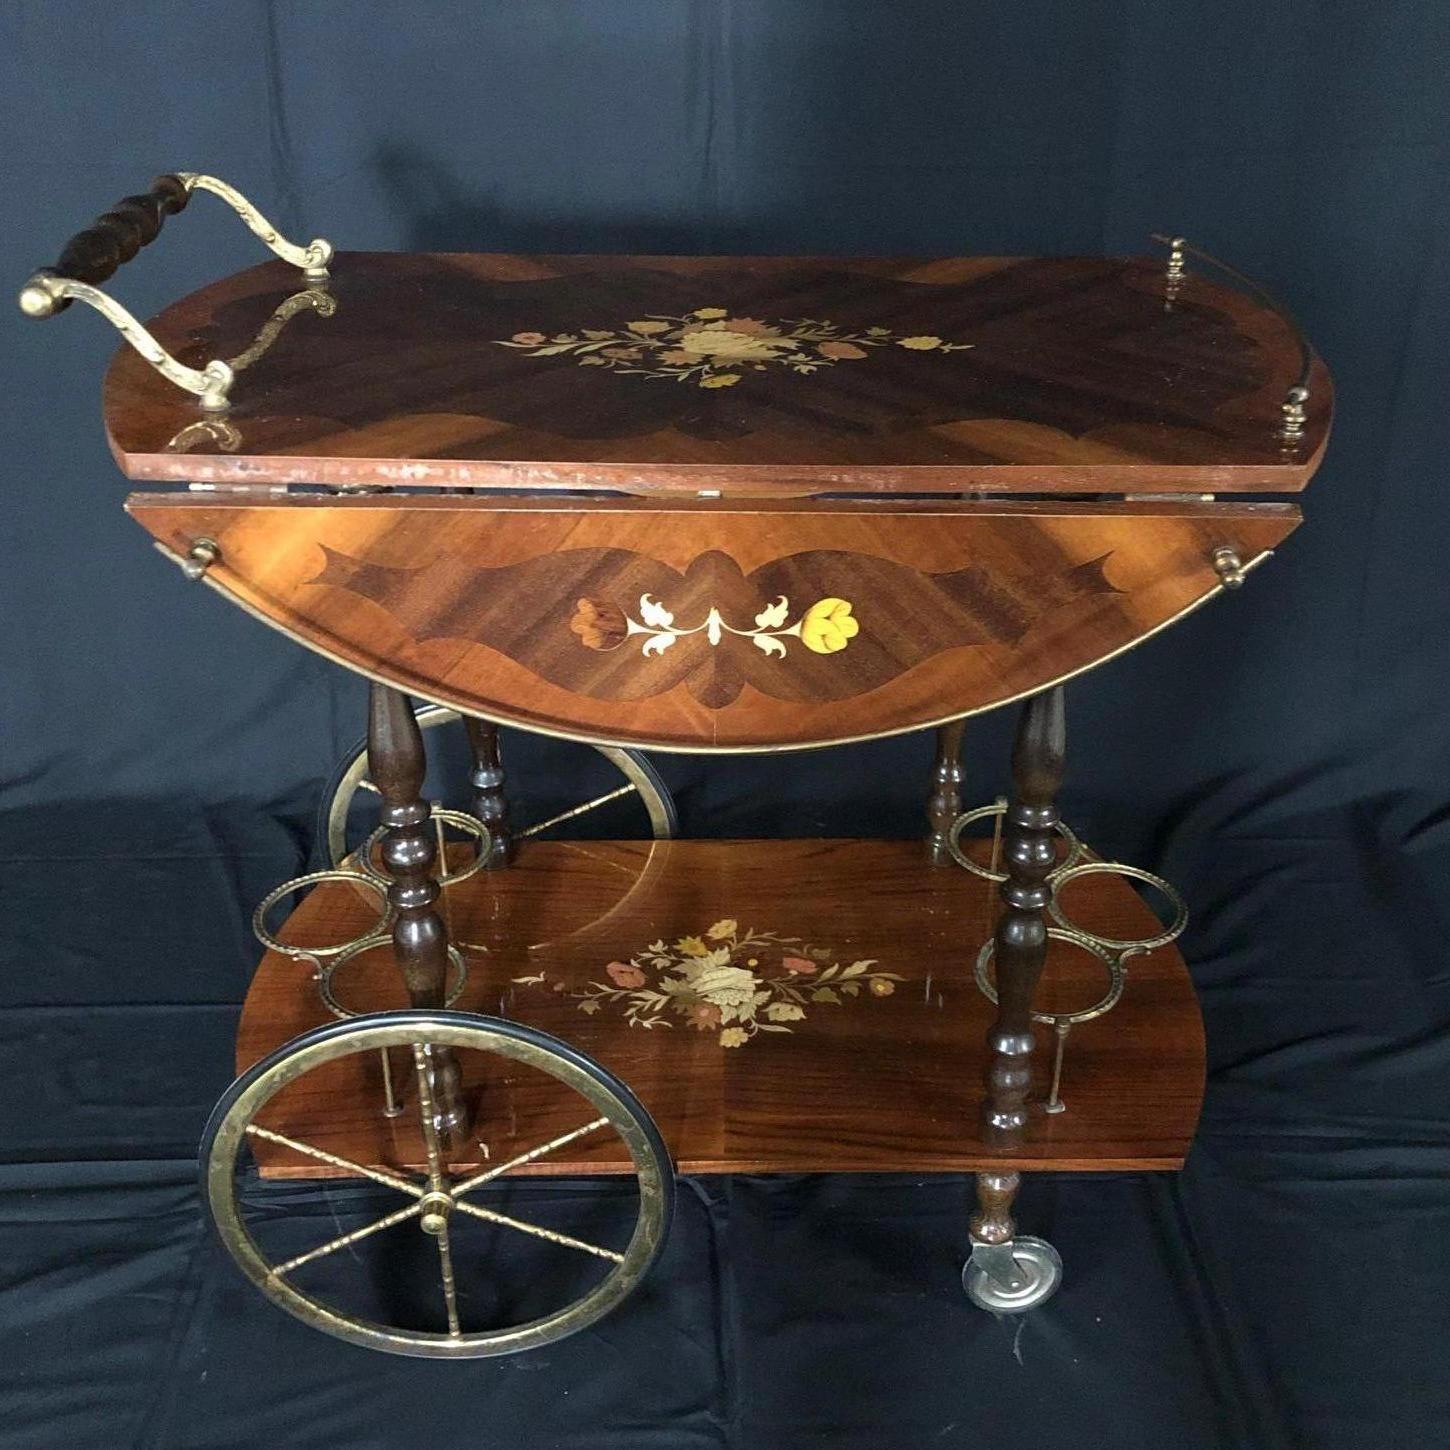 Beautiful early 20th century Italian bar cart with beautiful intricate marquetry throughout. Cart has two drop leaves for versatility and six intricate decorative brass bottle holder rings. This Italian bijou drinks trolley comprises of two levels